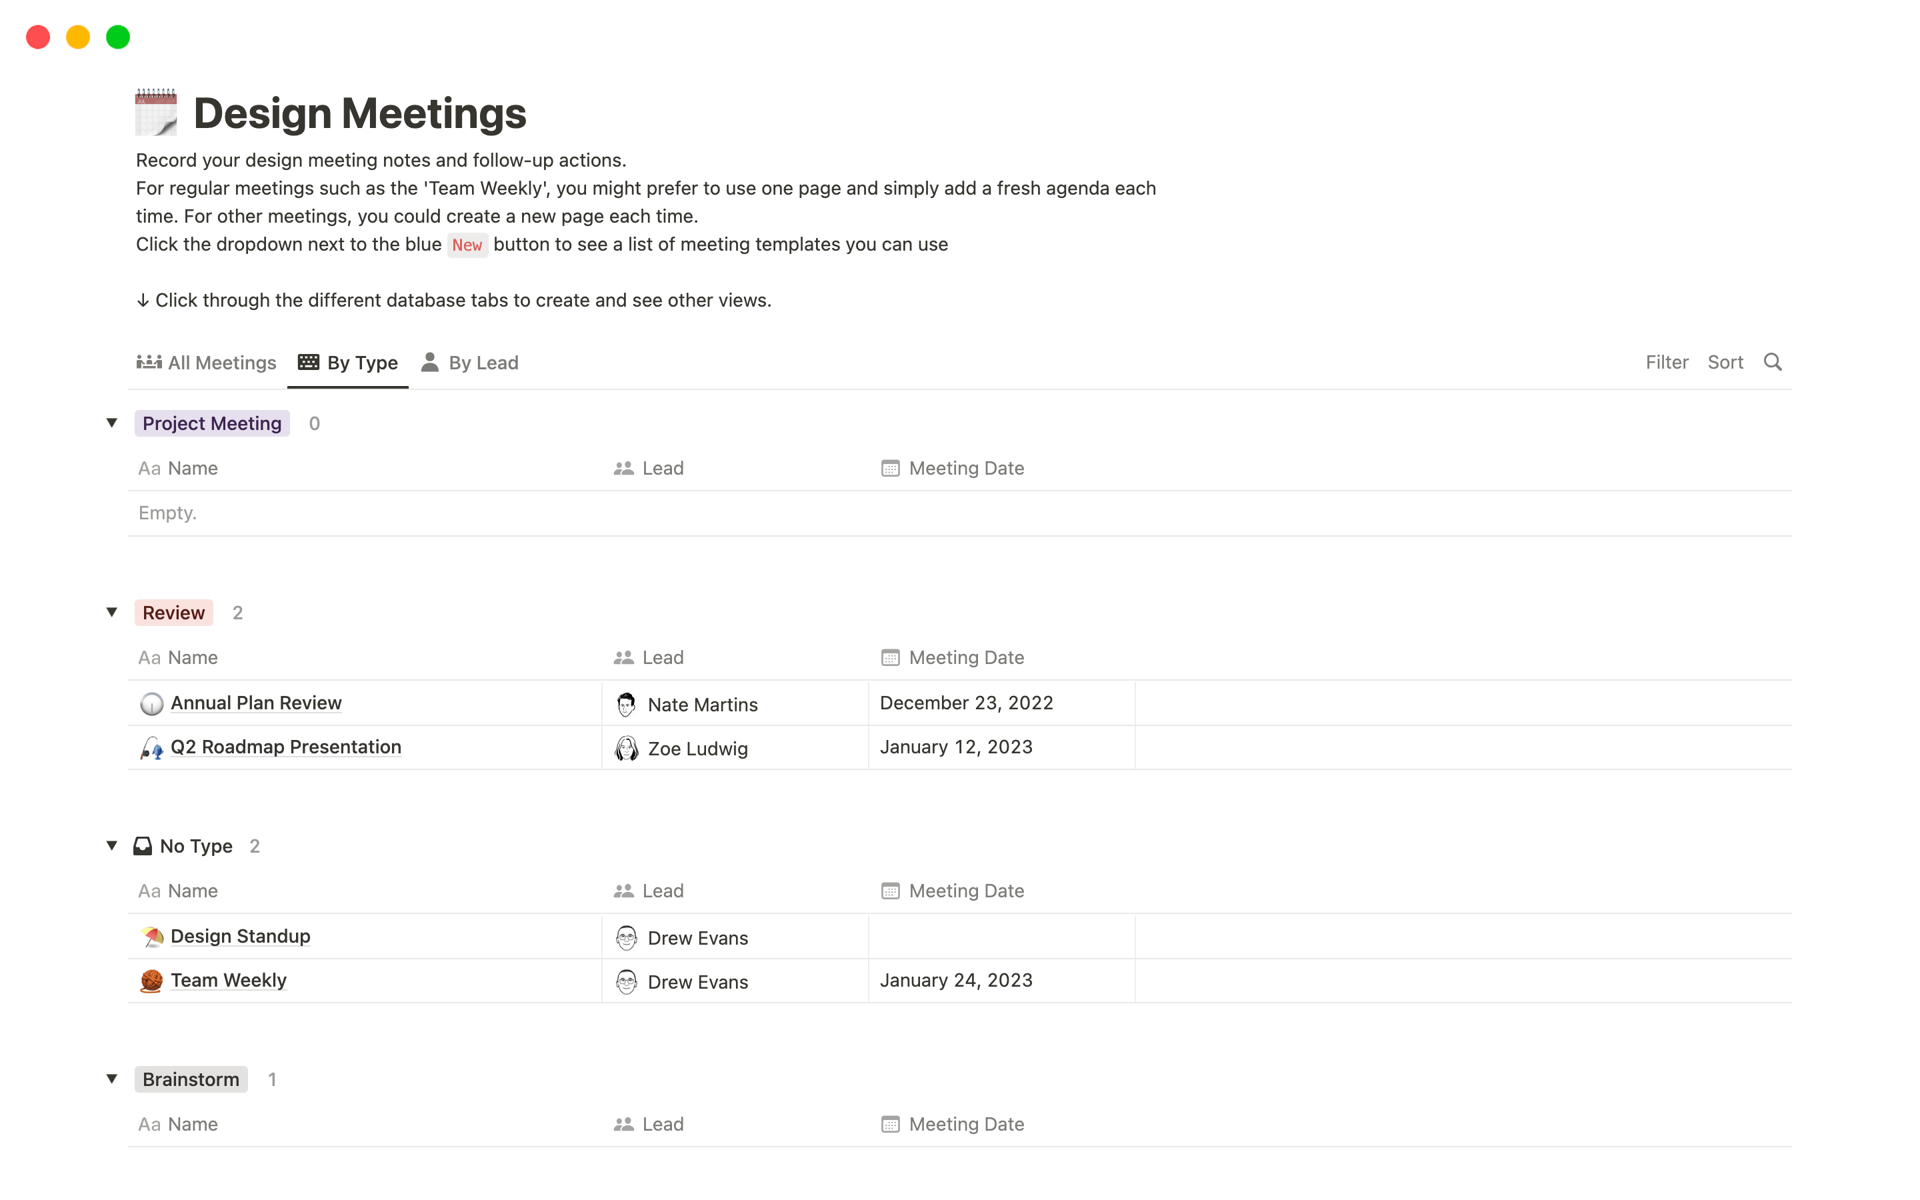 All-in-one set of templates for all your design meeting needs.